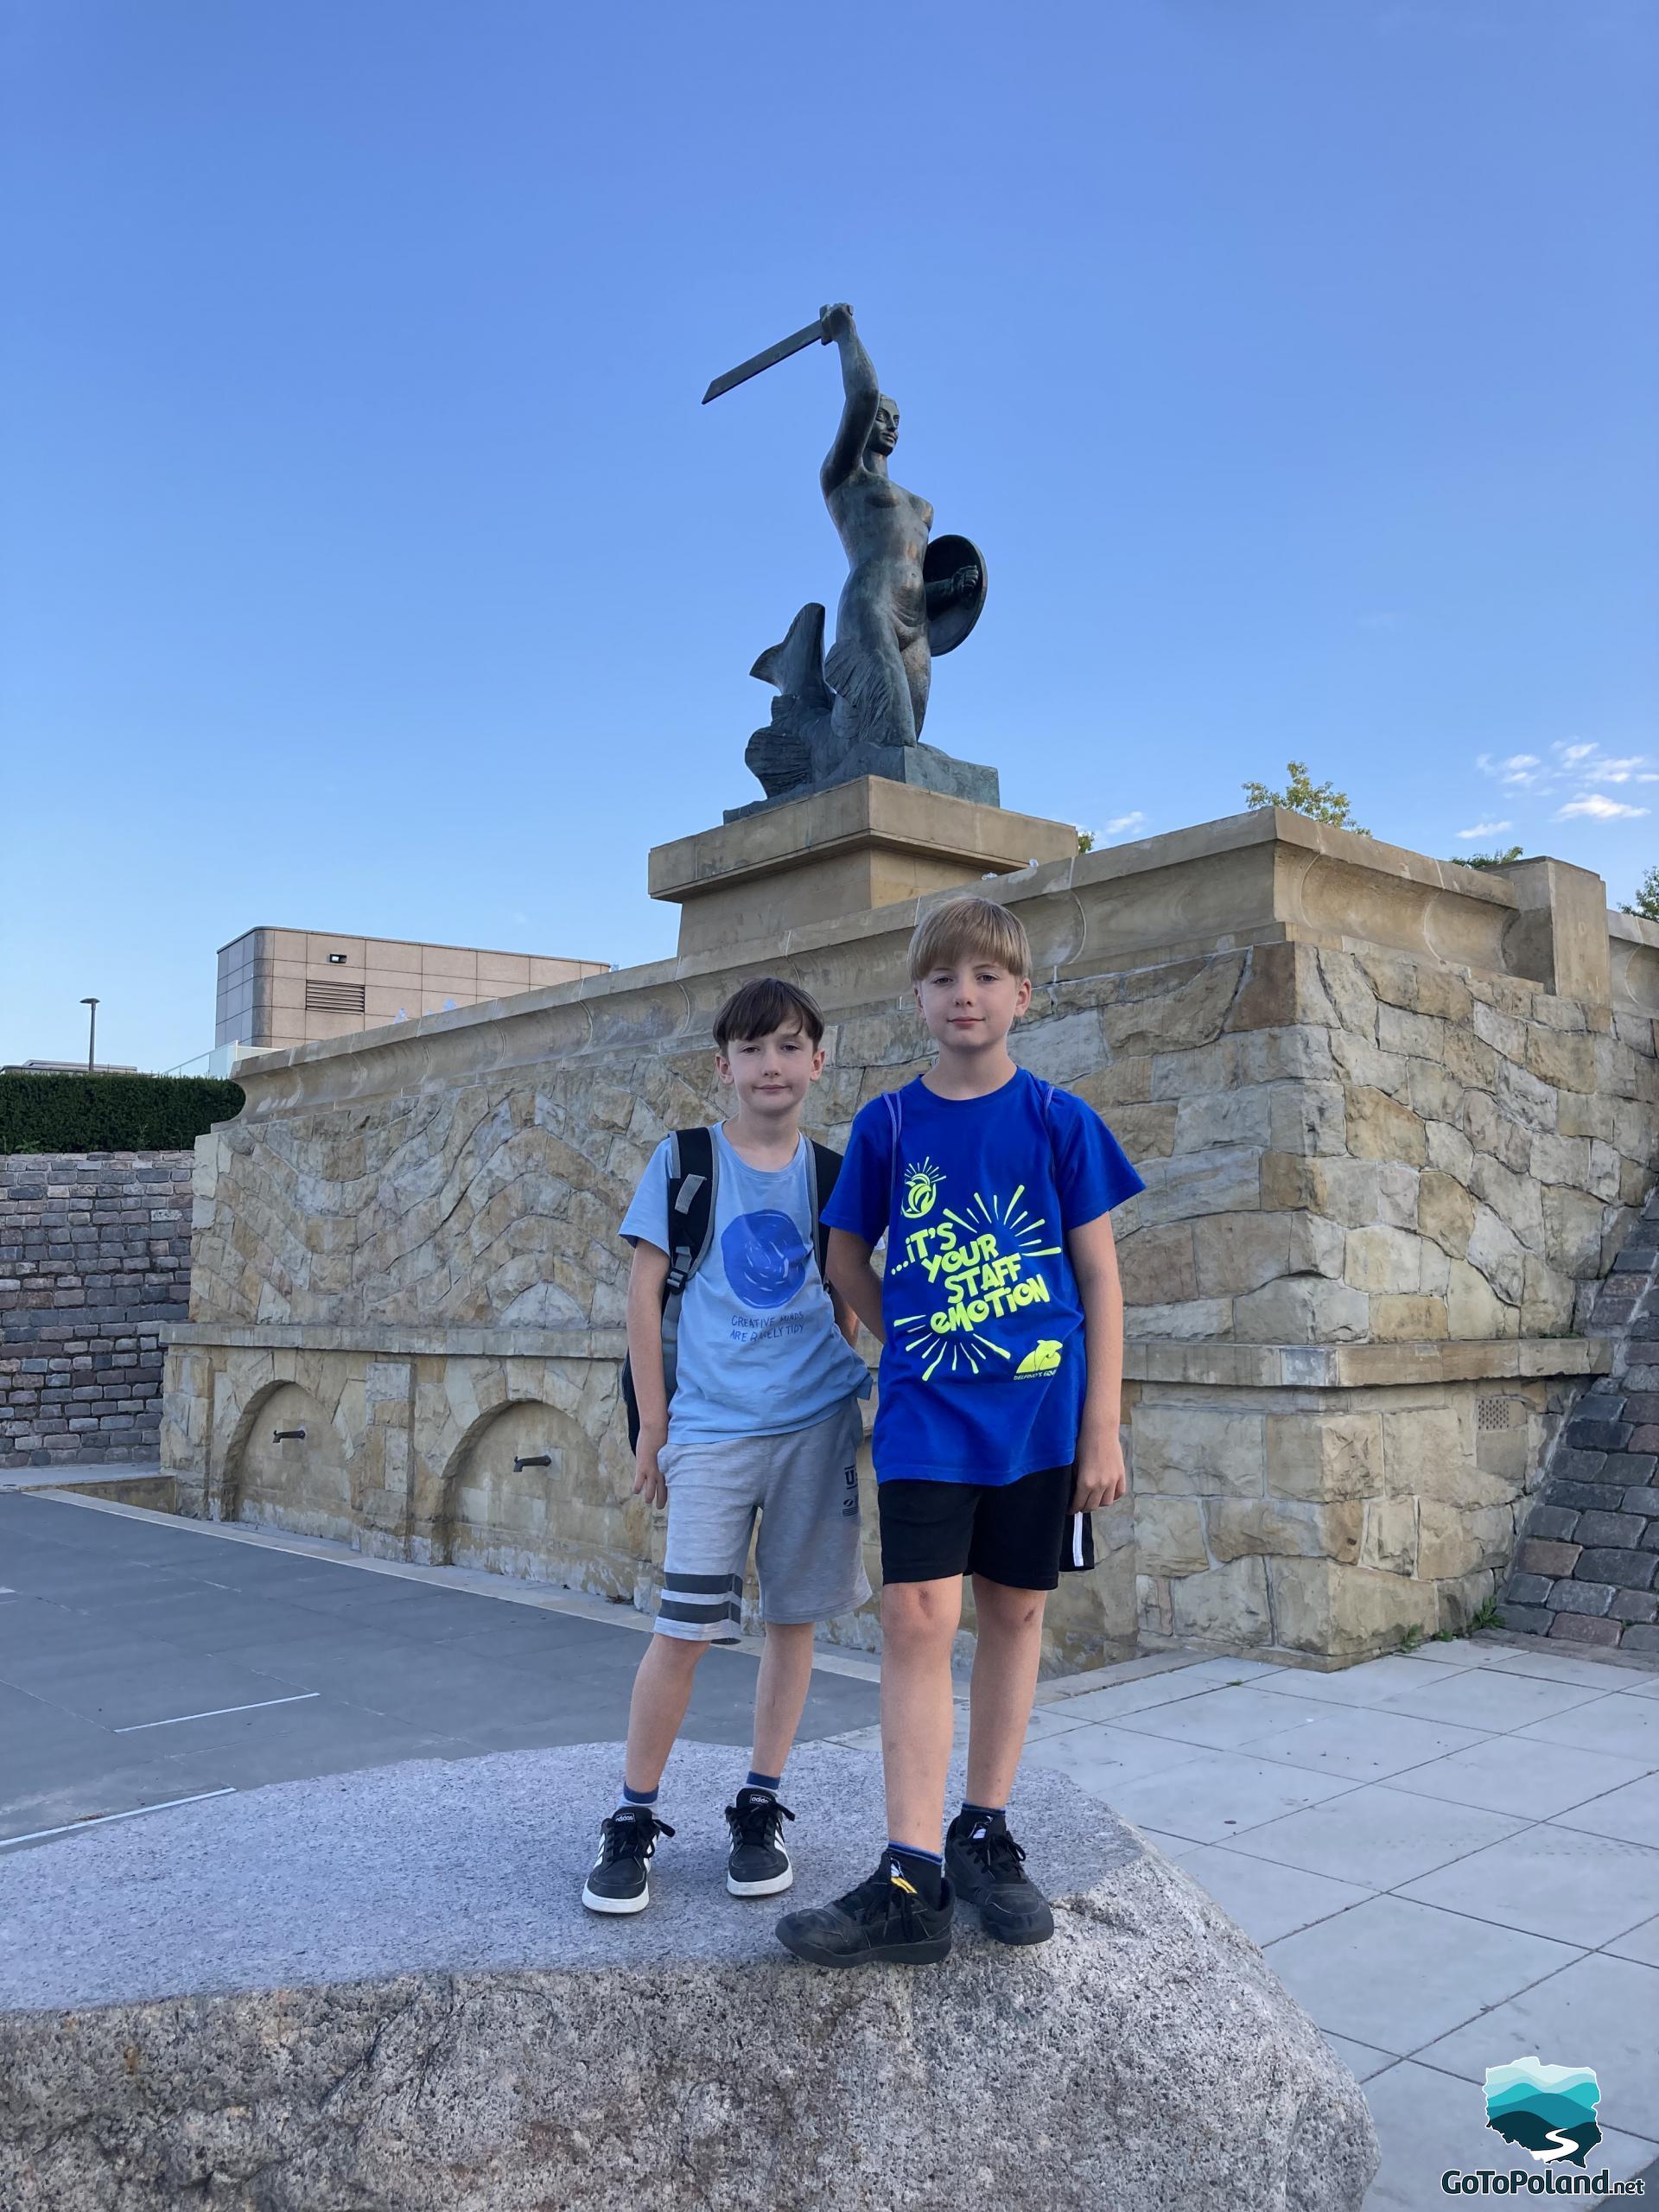 Two boys are standing in front of the mermaid statue